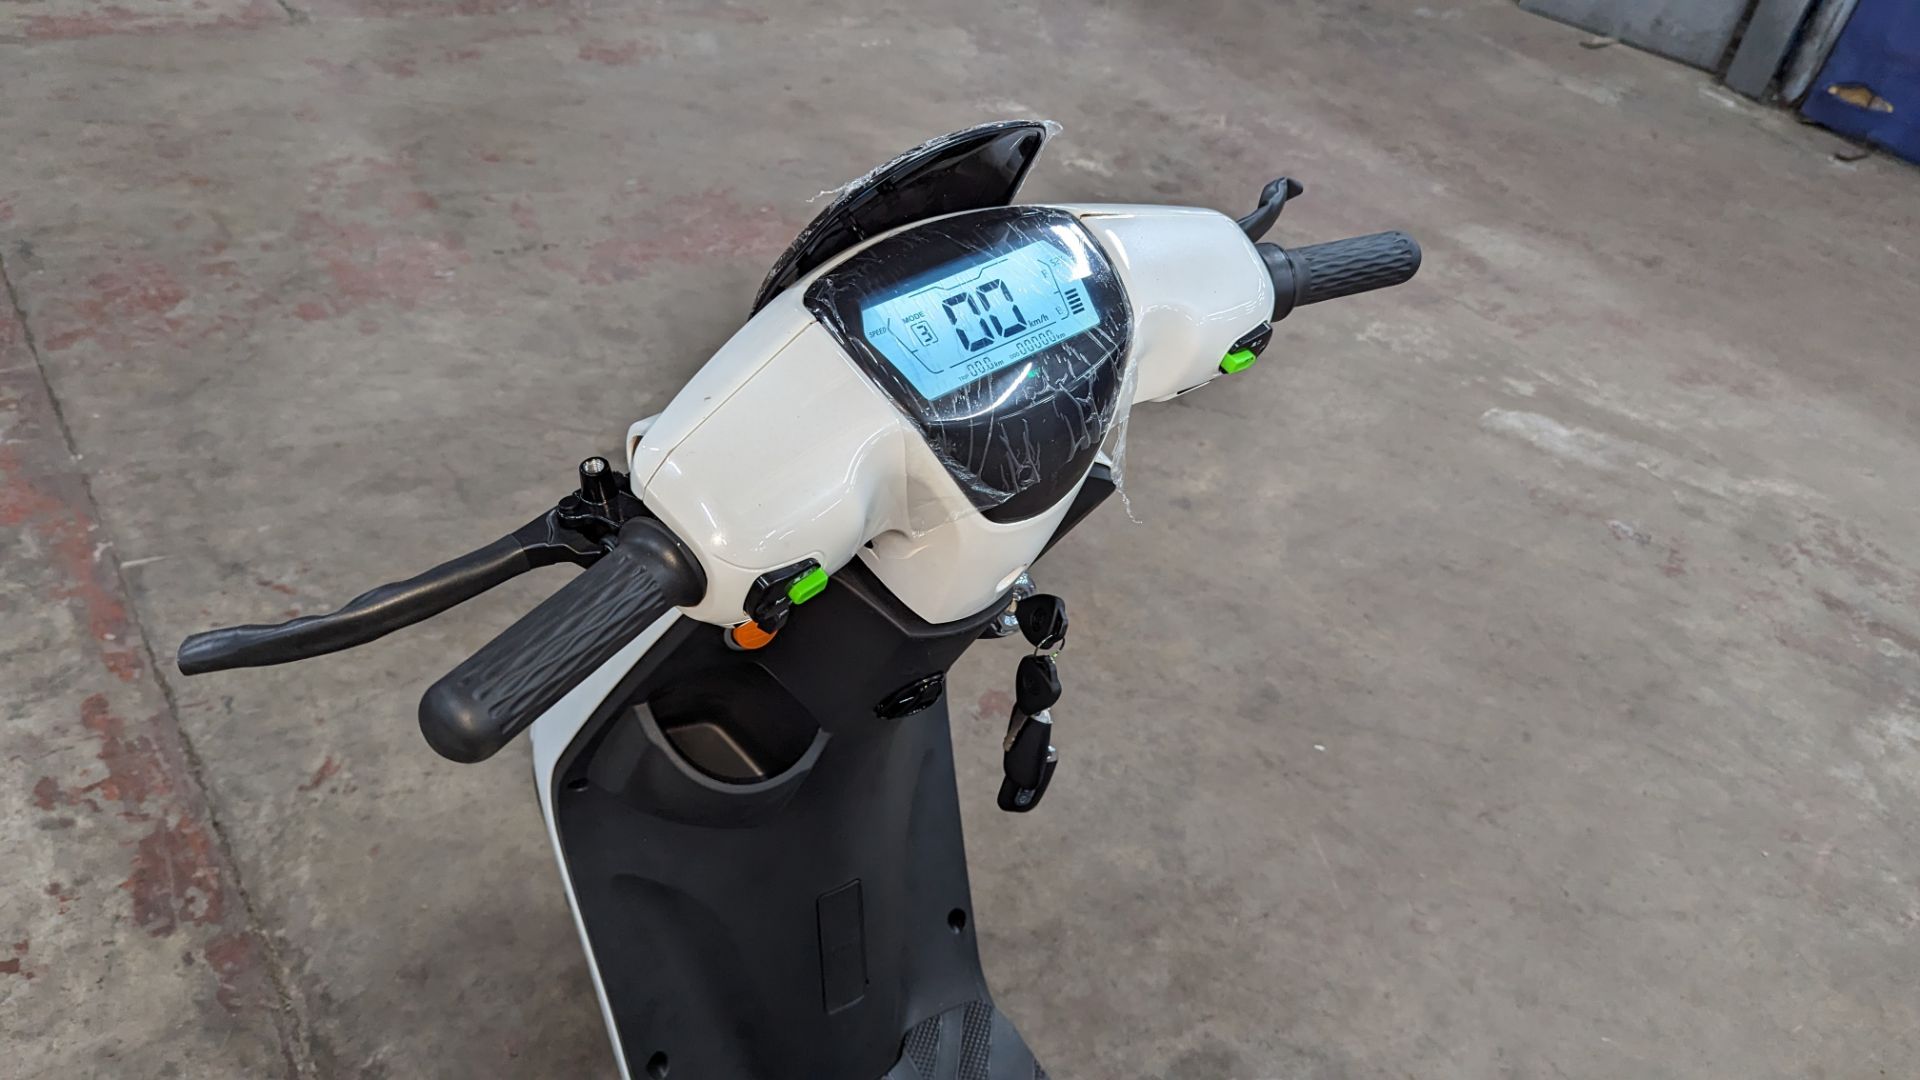 Model 18 Electric Bike: Zero (0) recorded miles, white body with black detailing, insulated box moun - Image 11 of 16